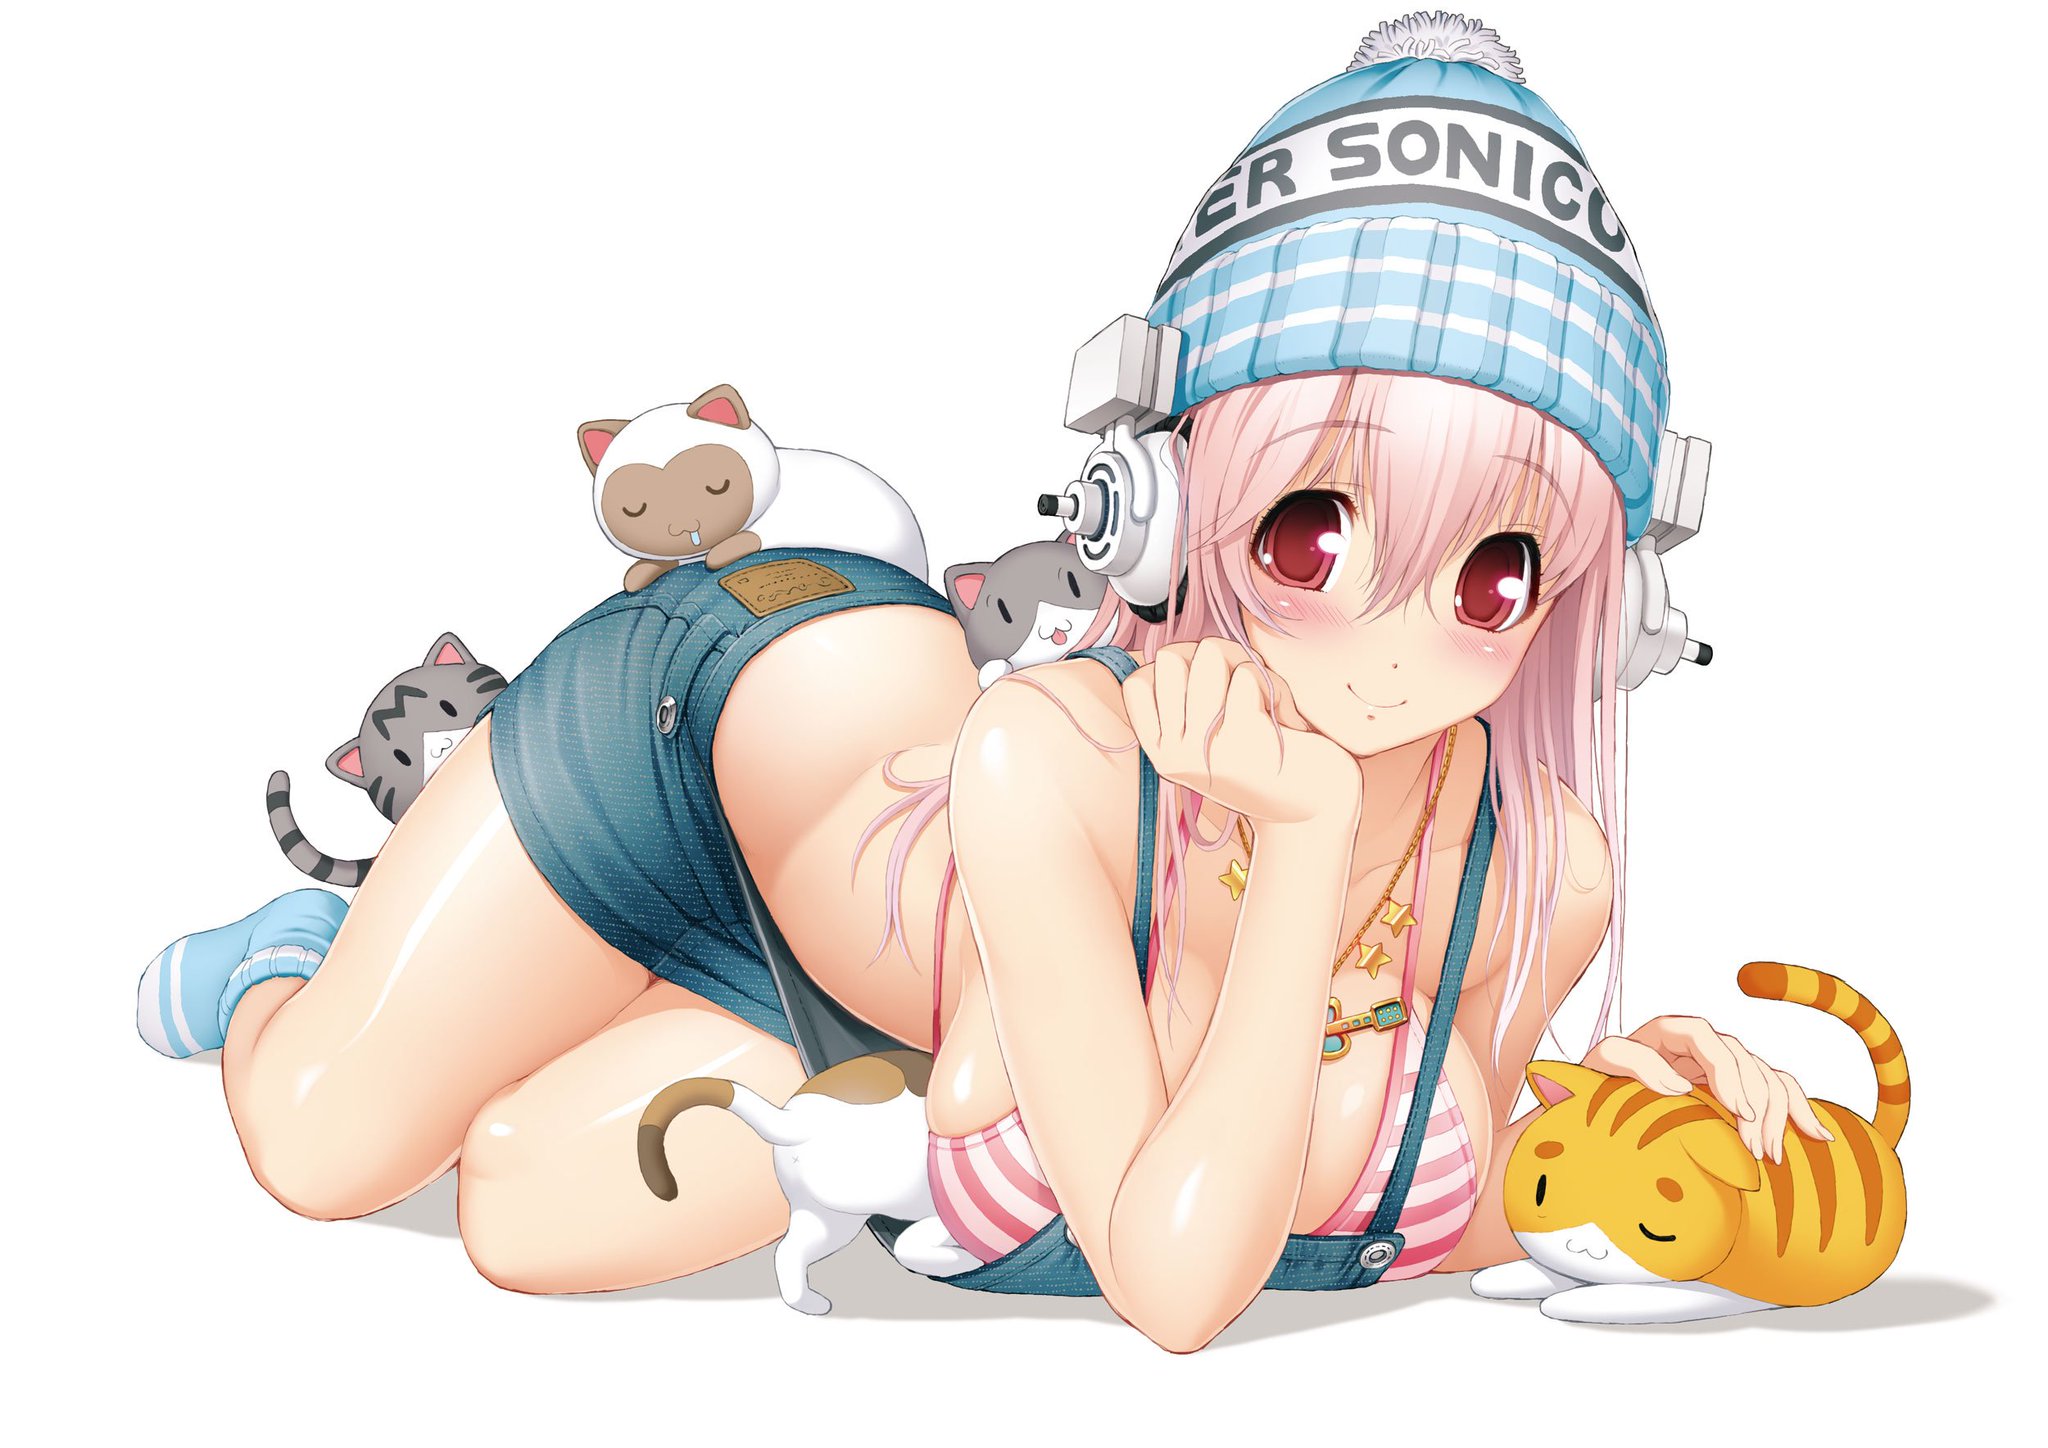 “Super Sonico (@sonico_macaron) has joined the Virtual YouTube game, and is...